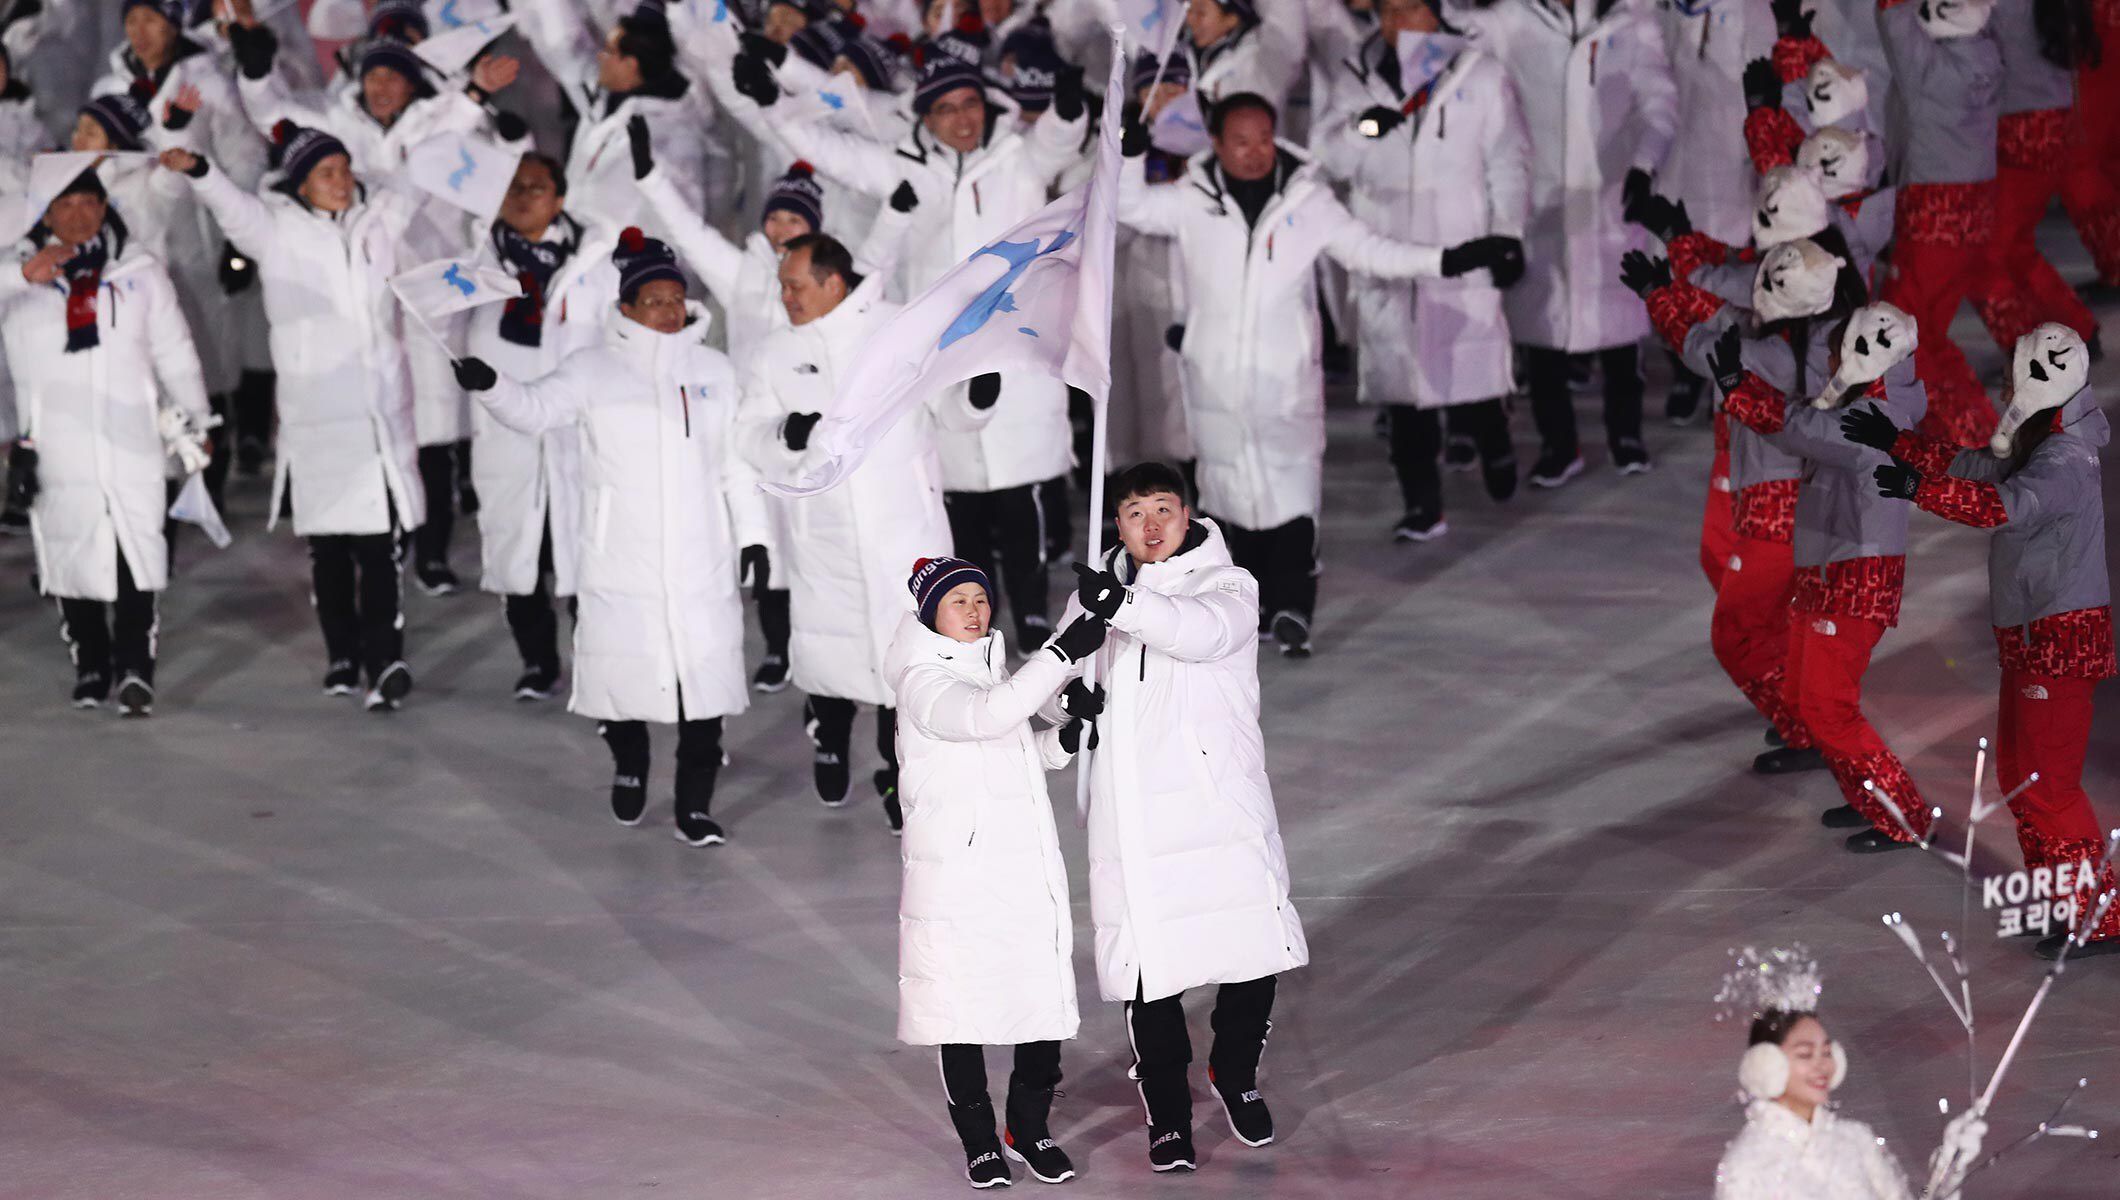 Unified Korea Team 2018 Olympic Opening Ceremony